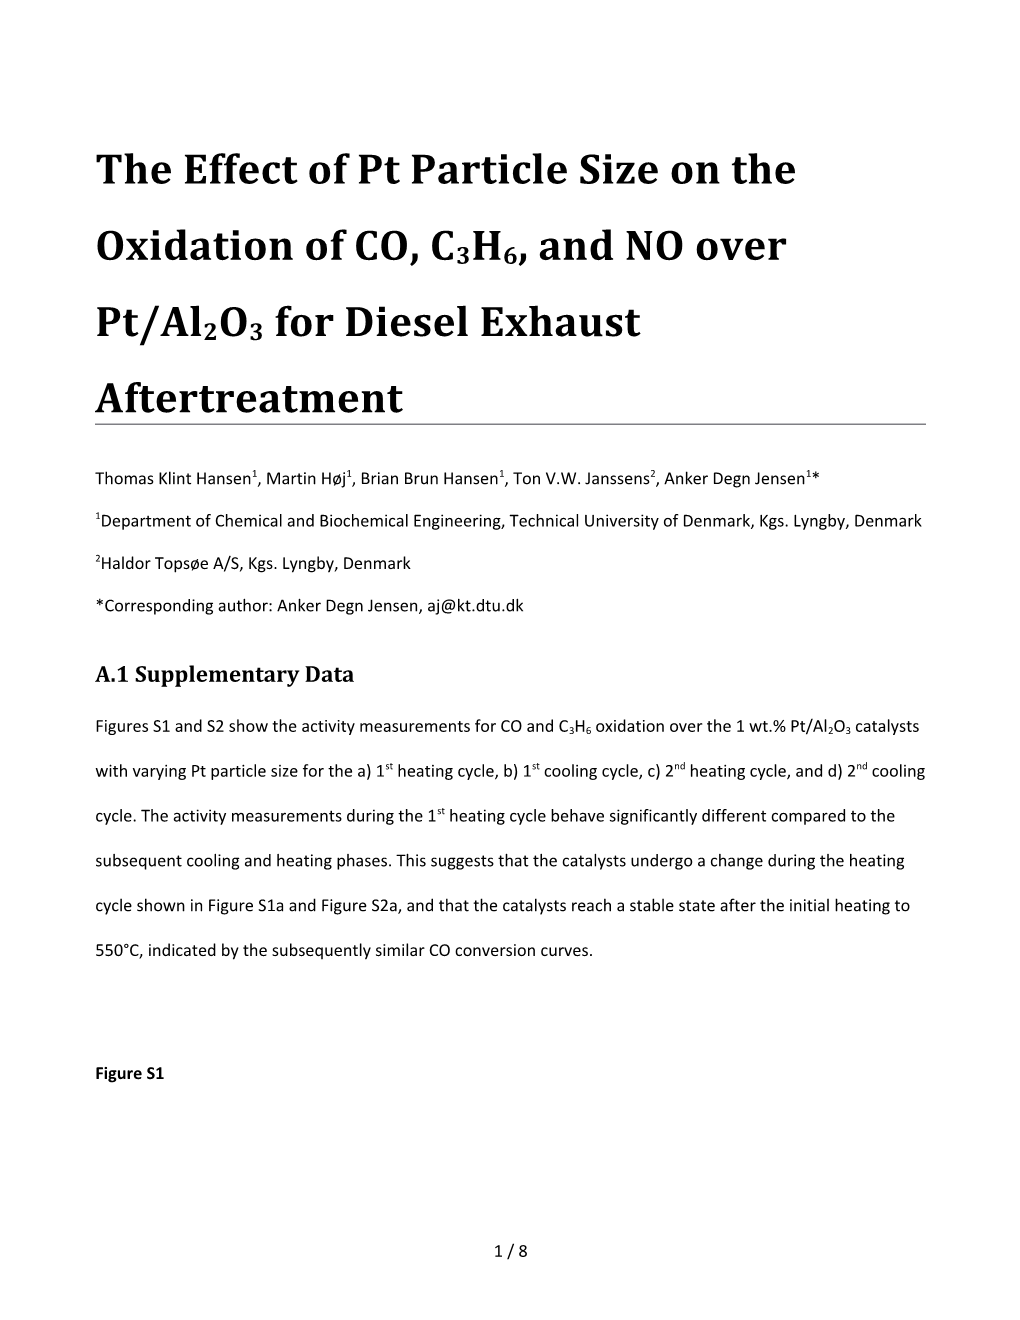 The Effect of Pt Particle Size on the Oxidation of CO, C3H6, and NO Over Pt/Al2o3 for Diesel